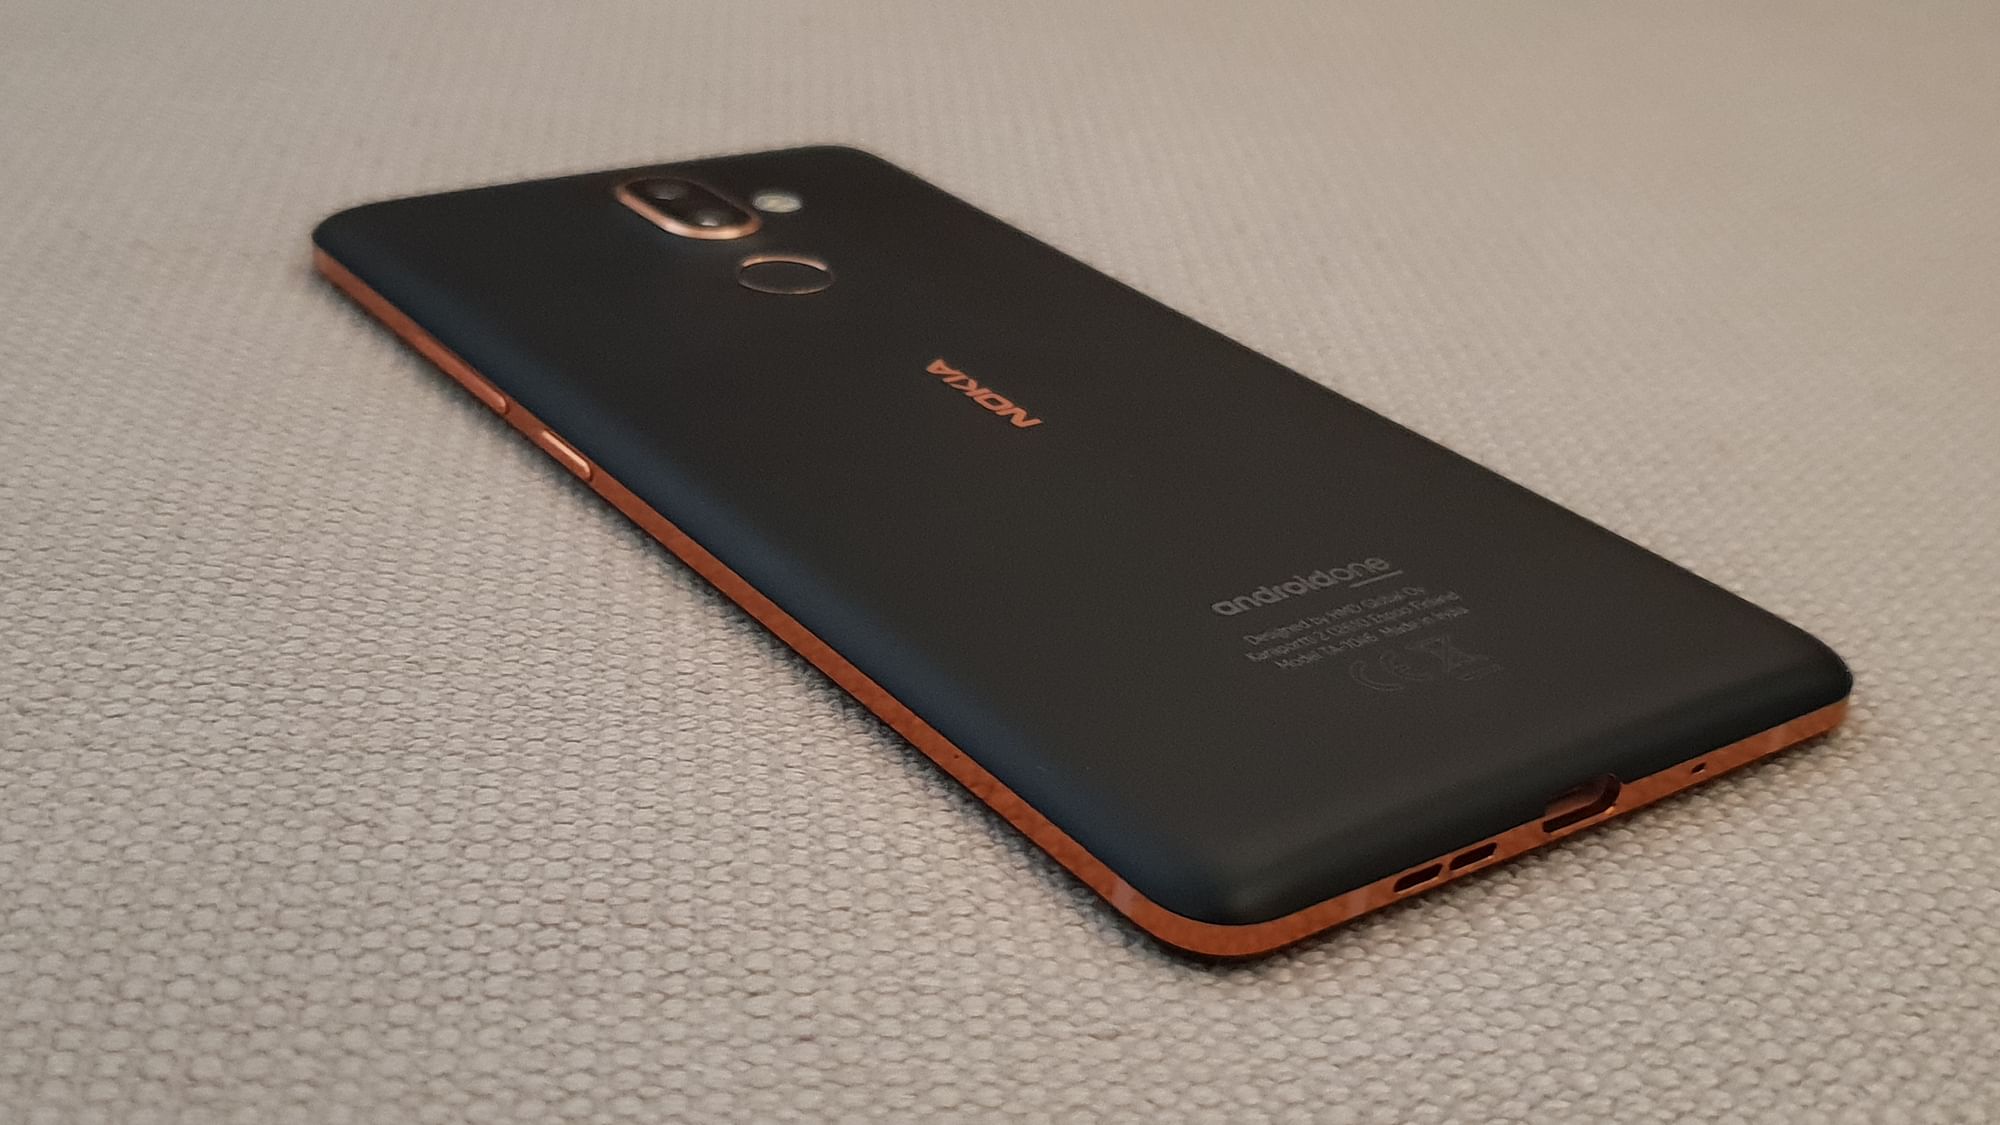 Nokia 7 Plus users, you might want to read this.